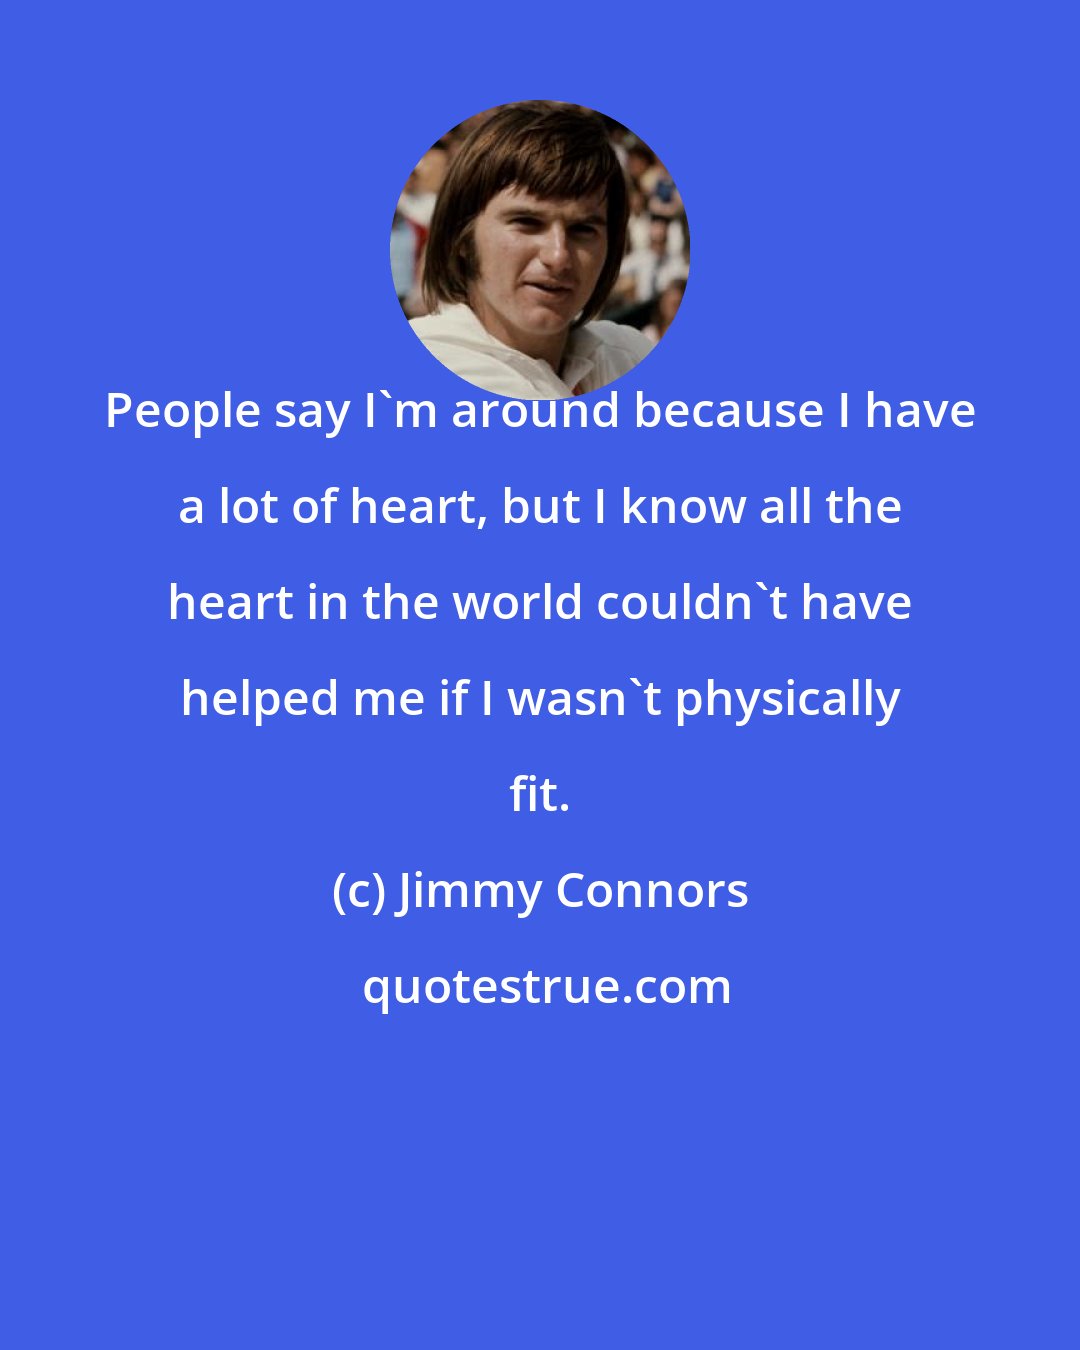 Jimmy Connors: People say I'm around because I have a lot of heart, but I know all the heart in the world couldn't have helped me if I wasn't physically fit.